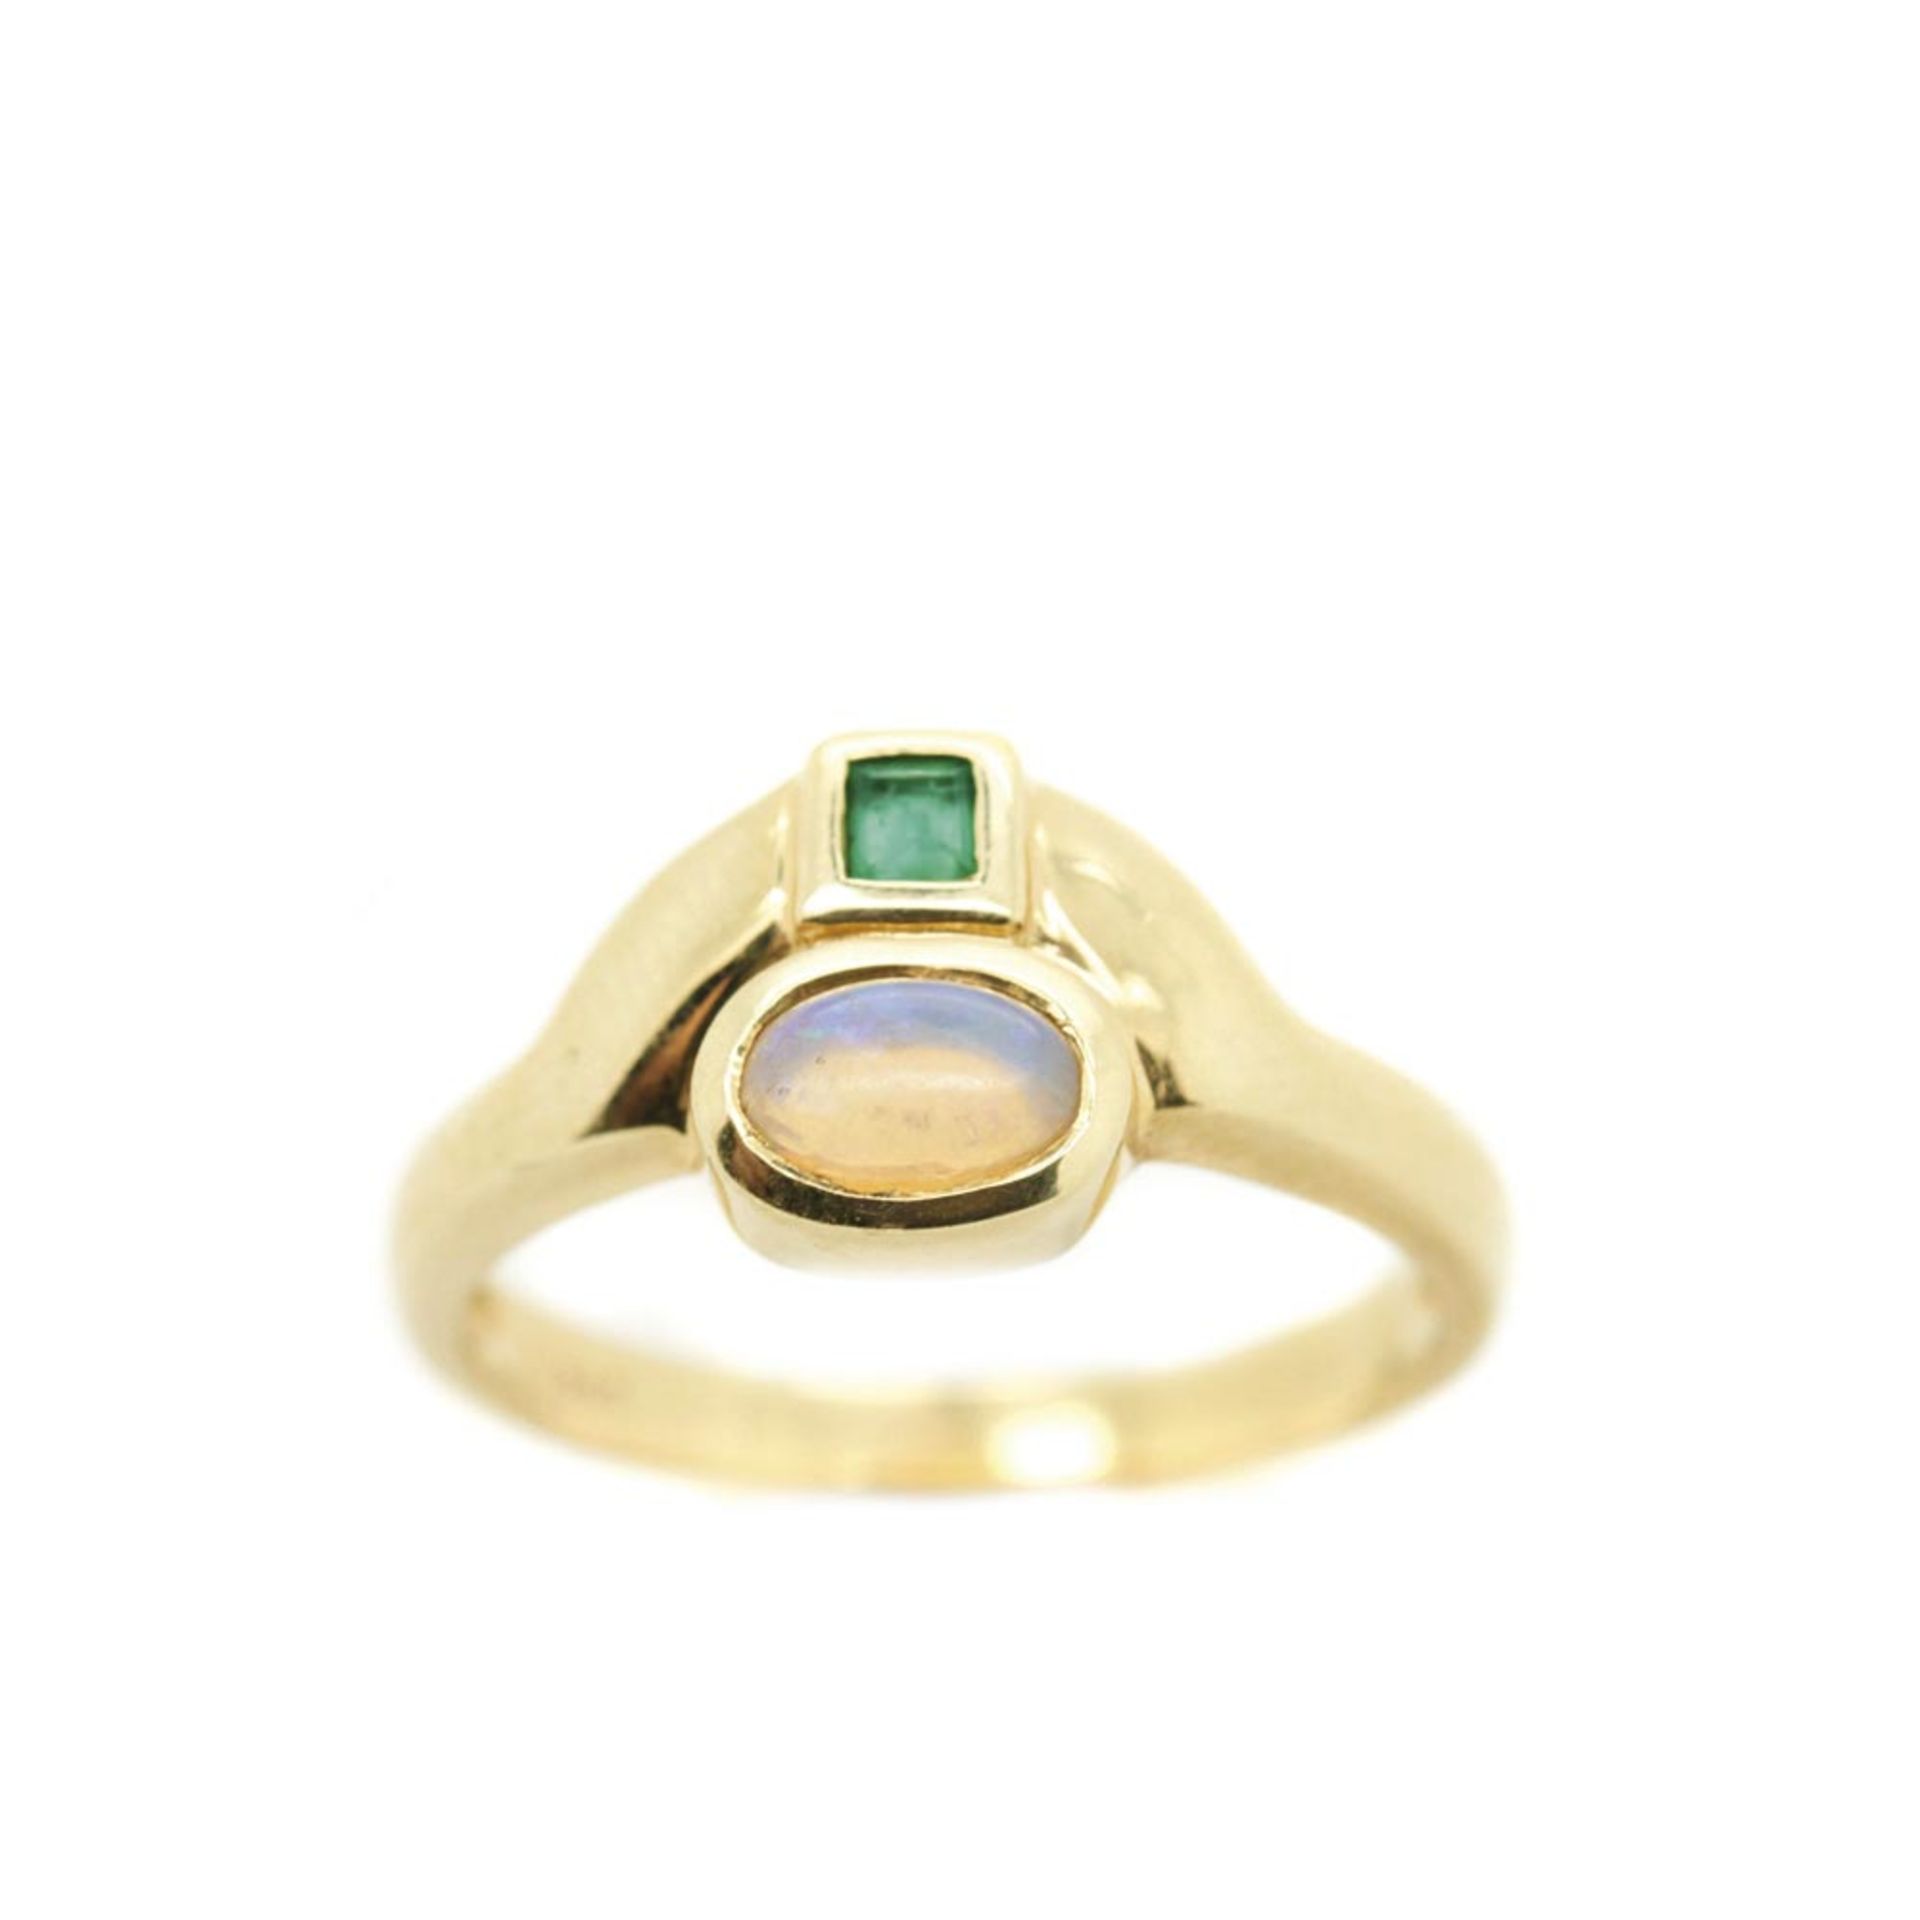 Gold, opal and emerald ring